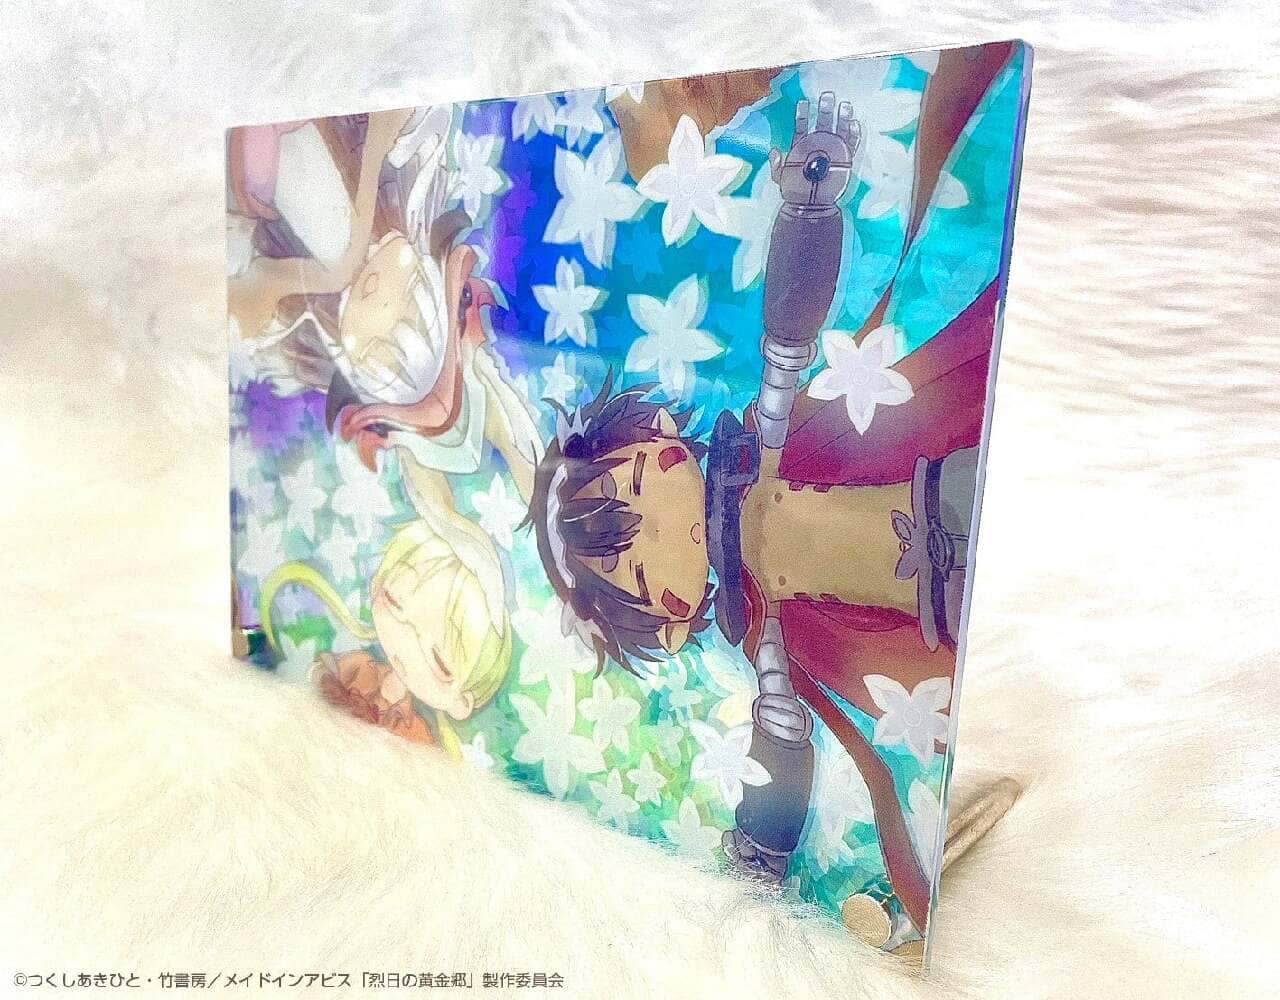 Village Vanguard's "Made in Abyss" Limited Edition Aurora Acrylic Panels Available for Pre-Order Online May 2, 2024; Anime Merchandise Also Available in Stores the Same Day Image 2